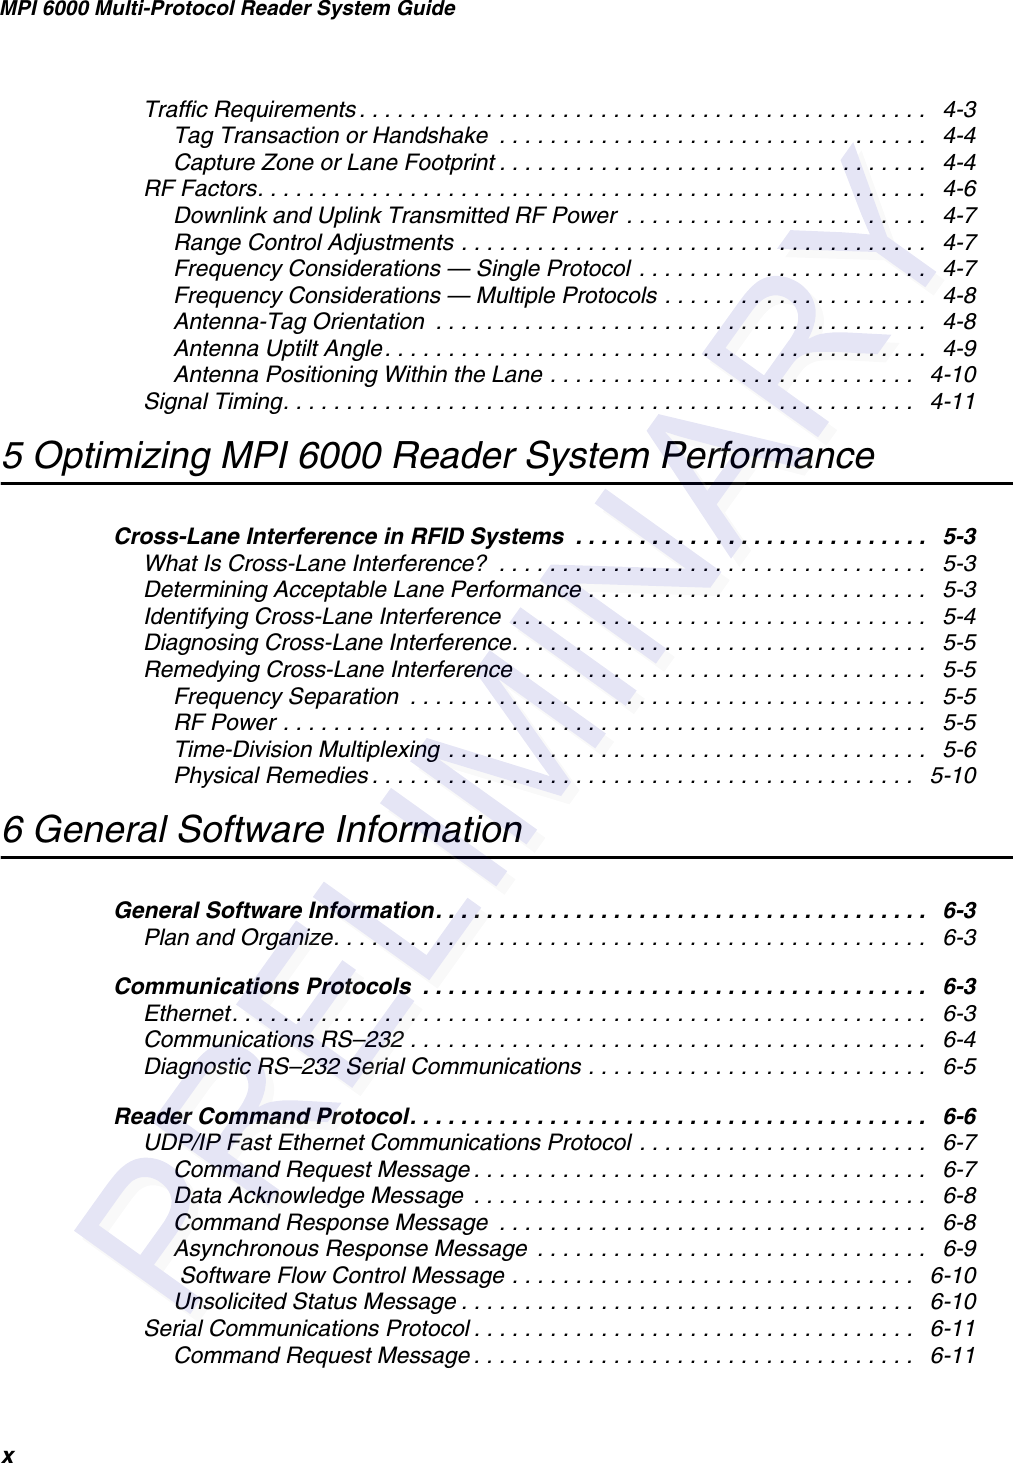 MPI 6000 Multi-Protocol Reader System GuidexTraffic Requirements . . . . . . . . . . . . . . . . . . . . . . . . . . . . . . . . . . . . . . . . . . . . .   4-3Tag Transaction or Handshake  . . . . . . . . . . . . . . . . . . . . . . . . . . . . . . . . . .   4-4Capture Zone or Lane Footprint . . . . . . . . . . . . . . . . . . . . . . . . . . . . . . . . . .   4-4RF Factors. . . . . . . . . . . . . . . . . . . . . . . . . . . . . . . . . . . . . . . . . . . . . . . . . . . . .   4-6Downlink and Uplink Transmitted RF Power  . . . . . . . . . . . . . . . . . . . . . . . .   4-7Range Control Adjustments . . . . . . . . . . . . . . . . . . . . . . . . . . . . . . . . . . . . .   4-7Frequency Considerations — Single Protocol  . . . . . . . . . . . . . . . . . . . . . . .   4-7Frequency Considerations — Multiple Protocols . . . . . . . . . . . . . . . . . . . . .   4-8Antenna-Tag Orientation  . . . . . . . . . . . . . . . . . . . . . . . . . . . . . . . . . . . . . . .   4-8Antenna Uptilt Angle. . . . . . . . . . . . . . . . . . . . . . . . . . . . . . . . . . . . . . . . . . .   4-9Antenna Positioning Within the Lane . . . . . . . . . . . . . . . . . . . . . . . . . . . . .   4-10Signal Timing. . . . . . . . . . . . . . . . . . . . . . . . . . . . . . . . . . . . . . . . . . . . . . . . . .   4-115 Optimizing MPI 6000 Reader System PerformanceCross-Lane Interference in RFID Systems  . . . . . . . . . . . . . . . . . . . . . . . . . . . .   5-3What Is Cross-Lane Interference?  . . . . . . . . . . . . . . . . . . . . . . . . . . . . . . . . . .   5-3Determining Acceptable Lane Performance . . . . . . . . . . . . . . . . . . . . . . . . . . .   5-3Identifying Cross-Lane Interference  . . . . . . . . . . . . . . . . . . . . . . . . . . . . . . . . .   5-4Diagnosing Cross-Lane Interference. . . . . . . . . . . . . . . . . . . . . . . . . . . . . . . . .   5-5Remedying Cross-Lane Interference  . . . . . . . . . . . . . . . . . . . . . . . . . . . . . . . .   5-5Frequency Separation  . . . . . . . . . . . . . . . . . . . . . . . . . . . . . . . . . . . . . . . . .   5-5RF Power . . . . . . . . . . . . . . . . . . . . . . . . . . . . . . . . . . . . . . . . . . . . . . . . . . .   5-5Time-Division Multiplexing  . . . . . . . . . . . . . . . . . . . . . . . . . . . . . . . . . . . . . .   5-6Physical Remedies . . . . . . . . . . . . . . . . . . . . . . . . . . . . . . . . . . . . . . . . . . .   5-106 General Software InformationGeneral Software Information. . . . . . . . . . . . . . . . . . . . . . . . . . . . . . . . . . . . . . .   6-3Plan and Organize. . . . . . . . . . . . . . . . . . . . . . . . . . . . . . . . . . . . . . . . . . . . . . .   6-3Communications Protocols  . . . . . . . . . . . . . . . . . . . . . . . . . . . . . . . . . . . . . . . .   6-3Ethernet. . . . . . . . . . . . . . . . . . . . . . . . . . . . . . . . . . . . . . . . . . . . . . . . . . . . . . .   6-3Communications RS–232 . . . . . . . . . . . . . . . . . . . . . . . . . . . . . . . . . . . . . . . . .   6-4Diagnostic RS–232 Serial Communications . . . . . . . . . . . . . . . . . . . . . . . . . . .   6-5Reader Command Protocol. . . . . . . . . . . . . . . . . . . . . . . . . . . . . . . . . . . . . . . . .   6-6UDP/IP Fast Ethernet Communications Protocol . . . . . . . . . . . . . . . . . . . . . . .   6-7Command Request Message . . . . . . . . . . . . . . . . . . . . . . . . . . . . . . . . . . . .   6-7Data Acknowledge Message  . . . . . . . . . . . . . . . . . . . . . . . . . . . . . . . . . . . .   6-8Command Response Message  . . . . . . . . . . . . . . . . . . . . . . . . . . . . . . . . . .   6-8Asynchronous Response Message  . . . . . . . . . . . . . . . . . . . . . . . . . . . . . . .   6-9 Software Flow Control Message . . . . . . . . . . . . . . . . . . . . . . . . . . . . . . . .   6-10Unsolicited Status Message . . . . . . . . . . . . . . . . . . . . . . . . . . . . . . . . . . . .   6-10Serial Communications Protocol . . . . . . . . . . . . . . . . . . . . . . . . . . . . . . . . . . .   6-11Command Request Message . . . . . . . . . . . . . . . . . . . . . . . . . . . . . . . . . . .   6-11